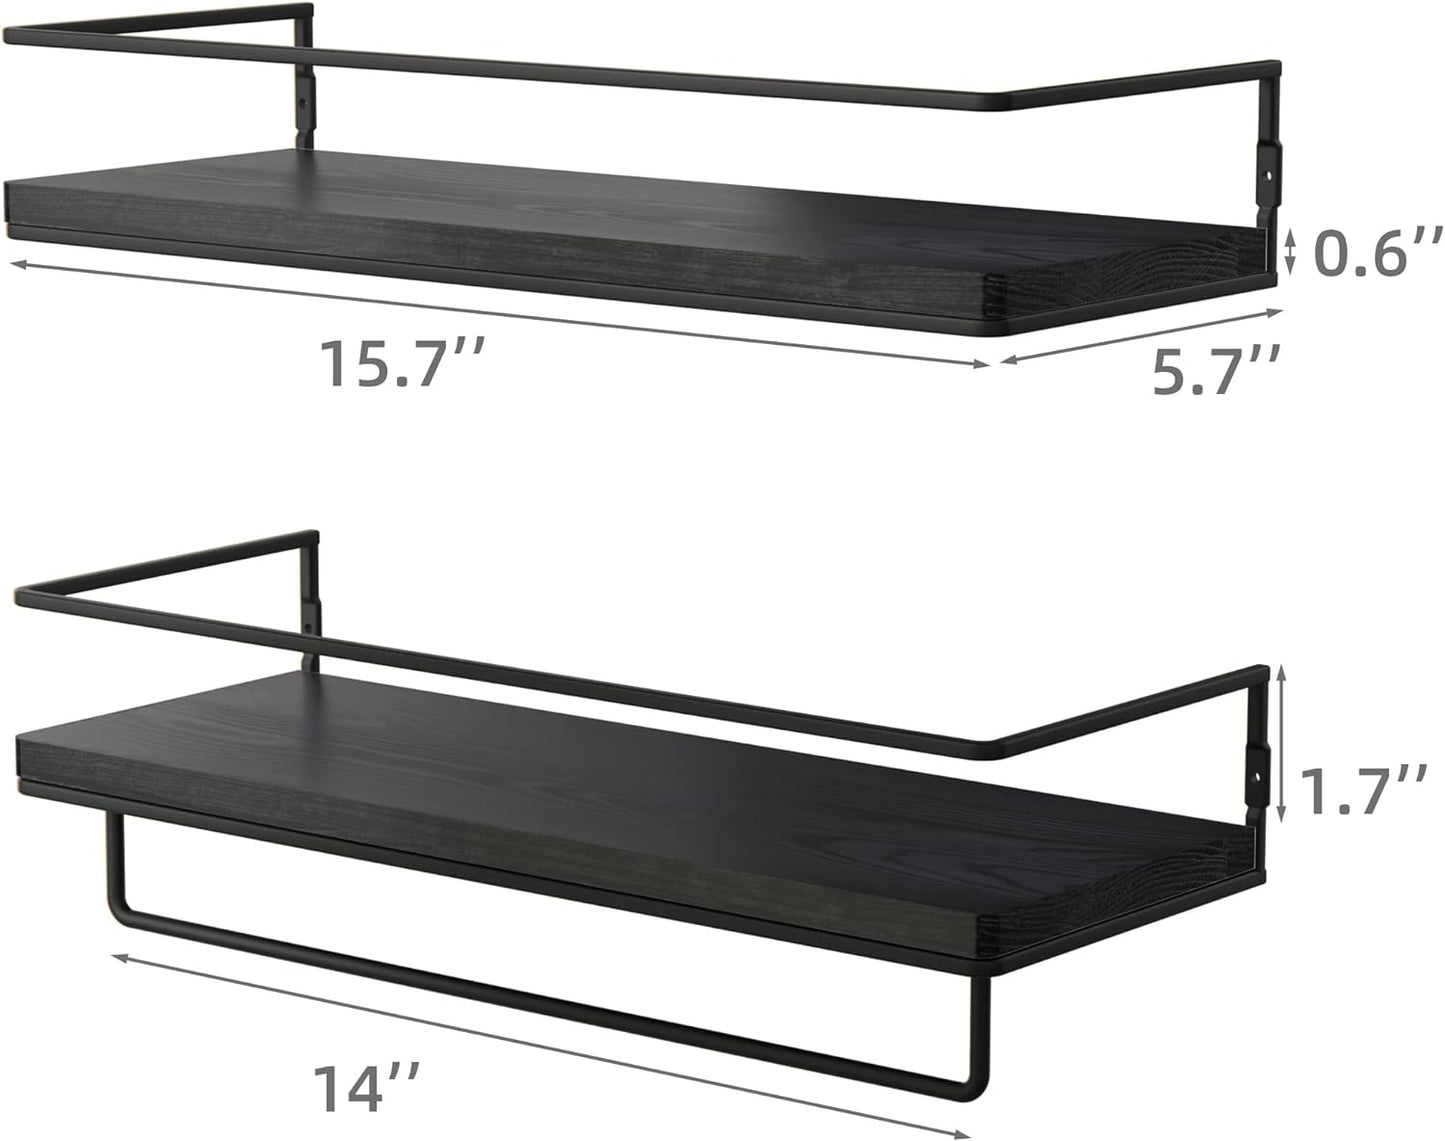 New Floating Shelves for Wall Set of 2, Wall Mounted Storage Shelves with Black Metal Frame and Towel Rack for Bathroom, Bedroom, Living Room, Kitchen, Office (Black)